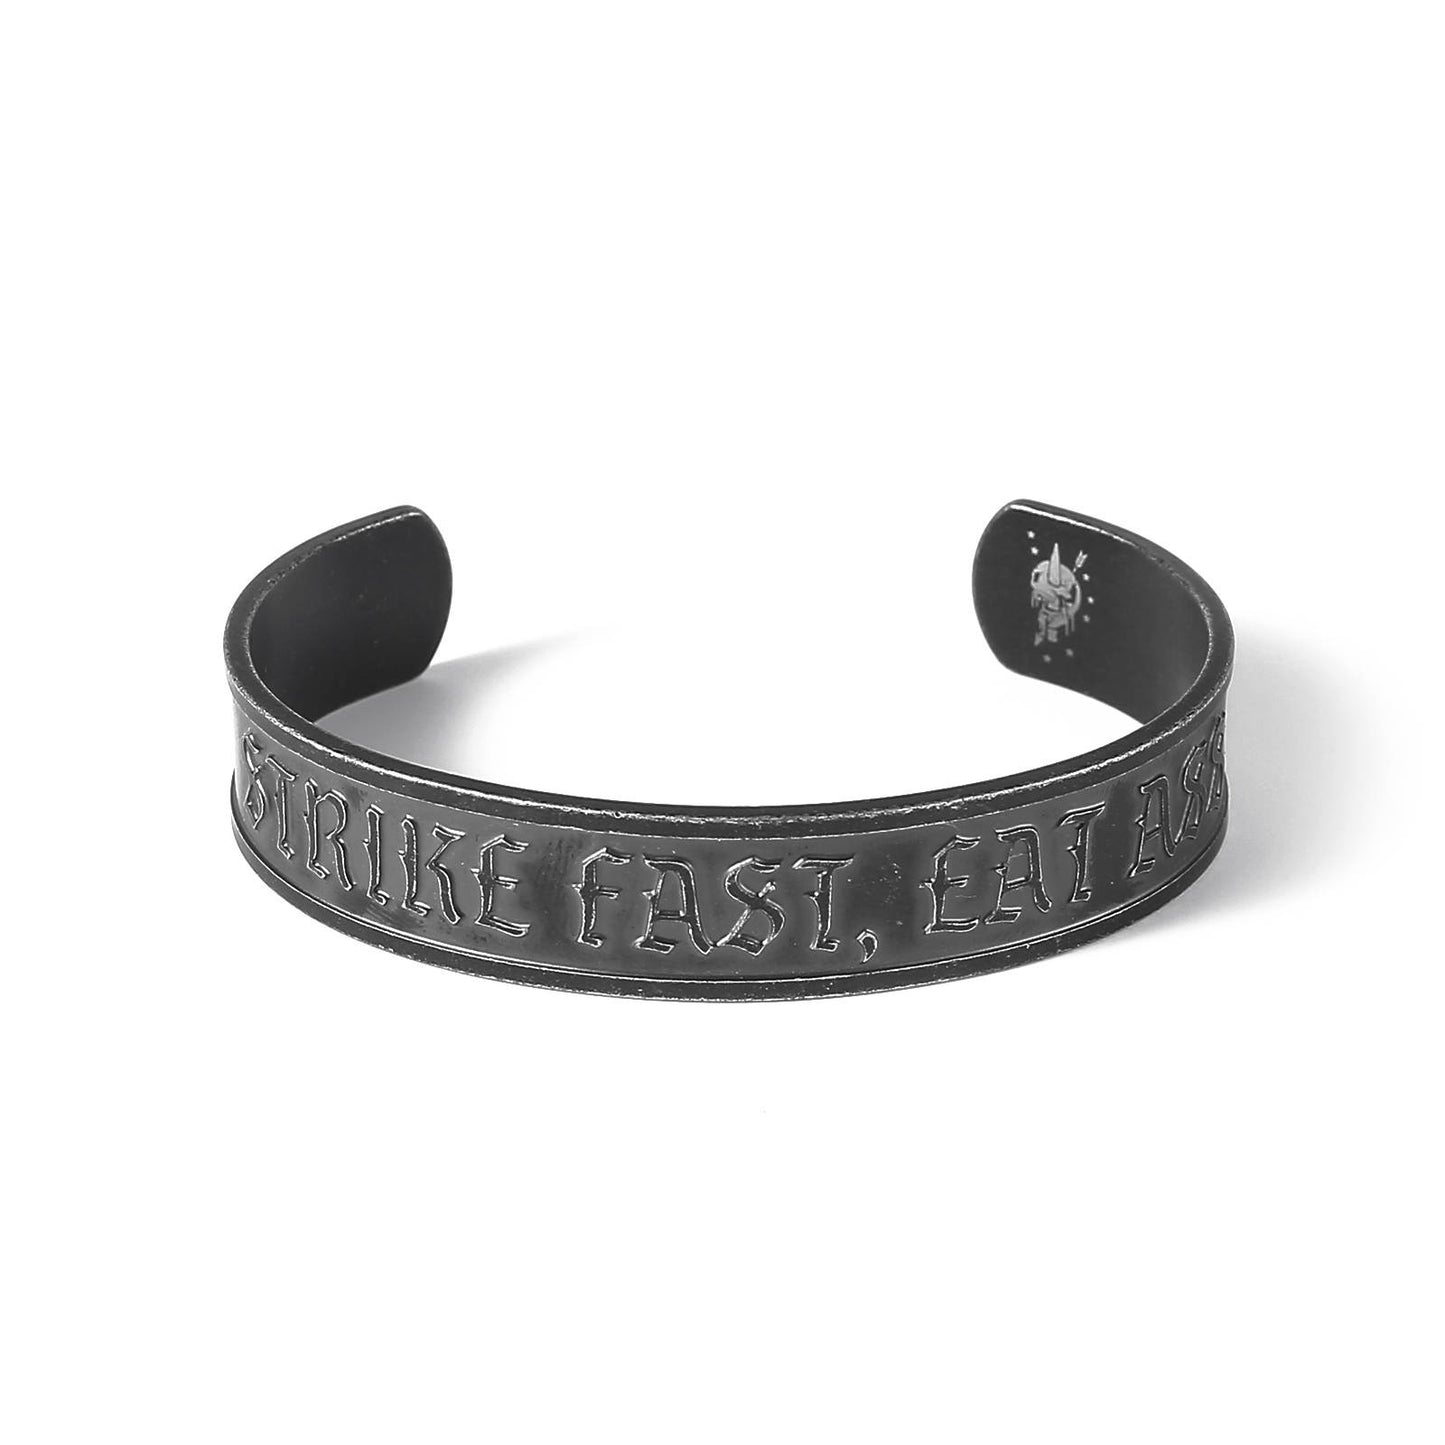 Strike Fast, Eat Ass - Stainless Steel Cuff Braclet